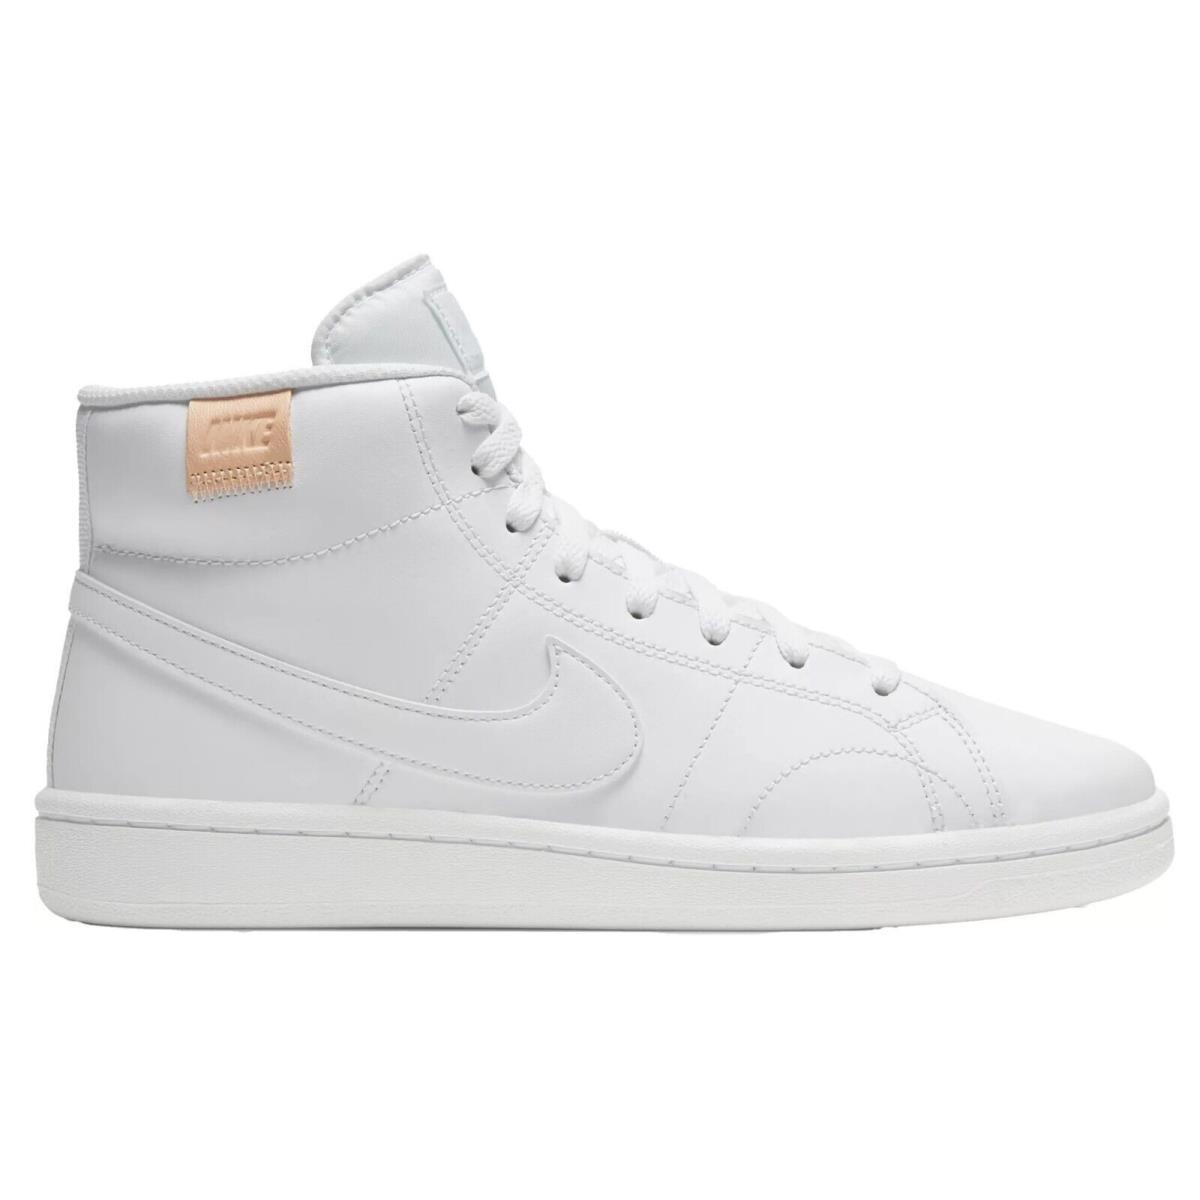 Nike Court Royale 2 Mid Womens CT1725-100 All White Shoes Sneakers